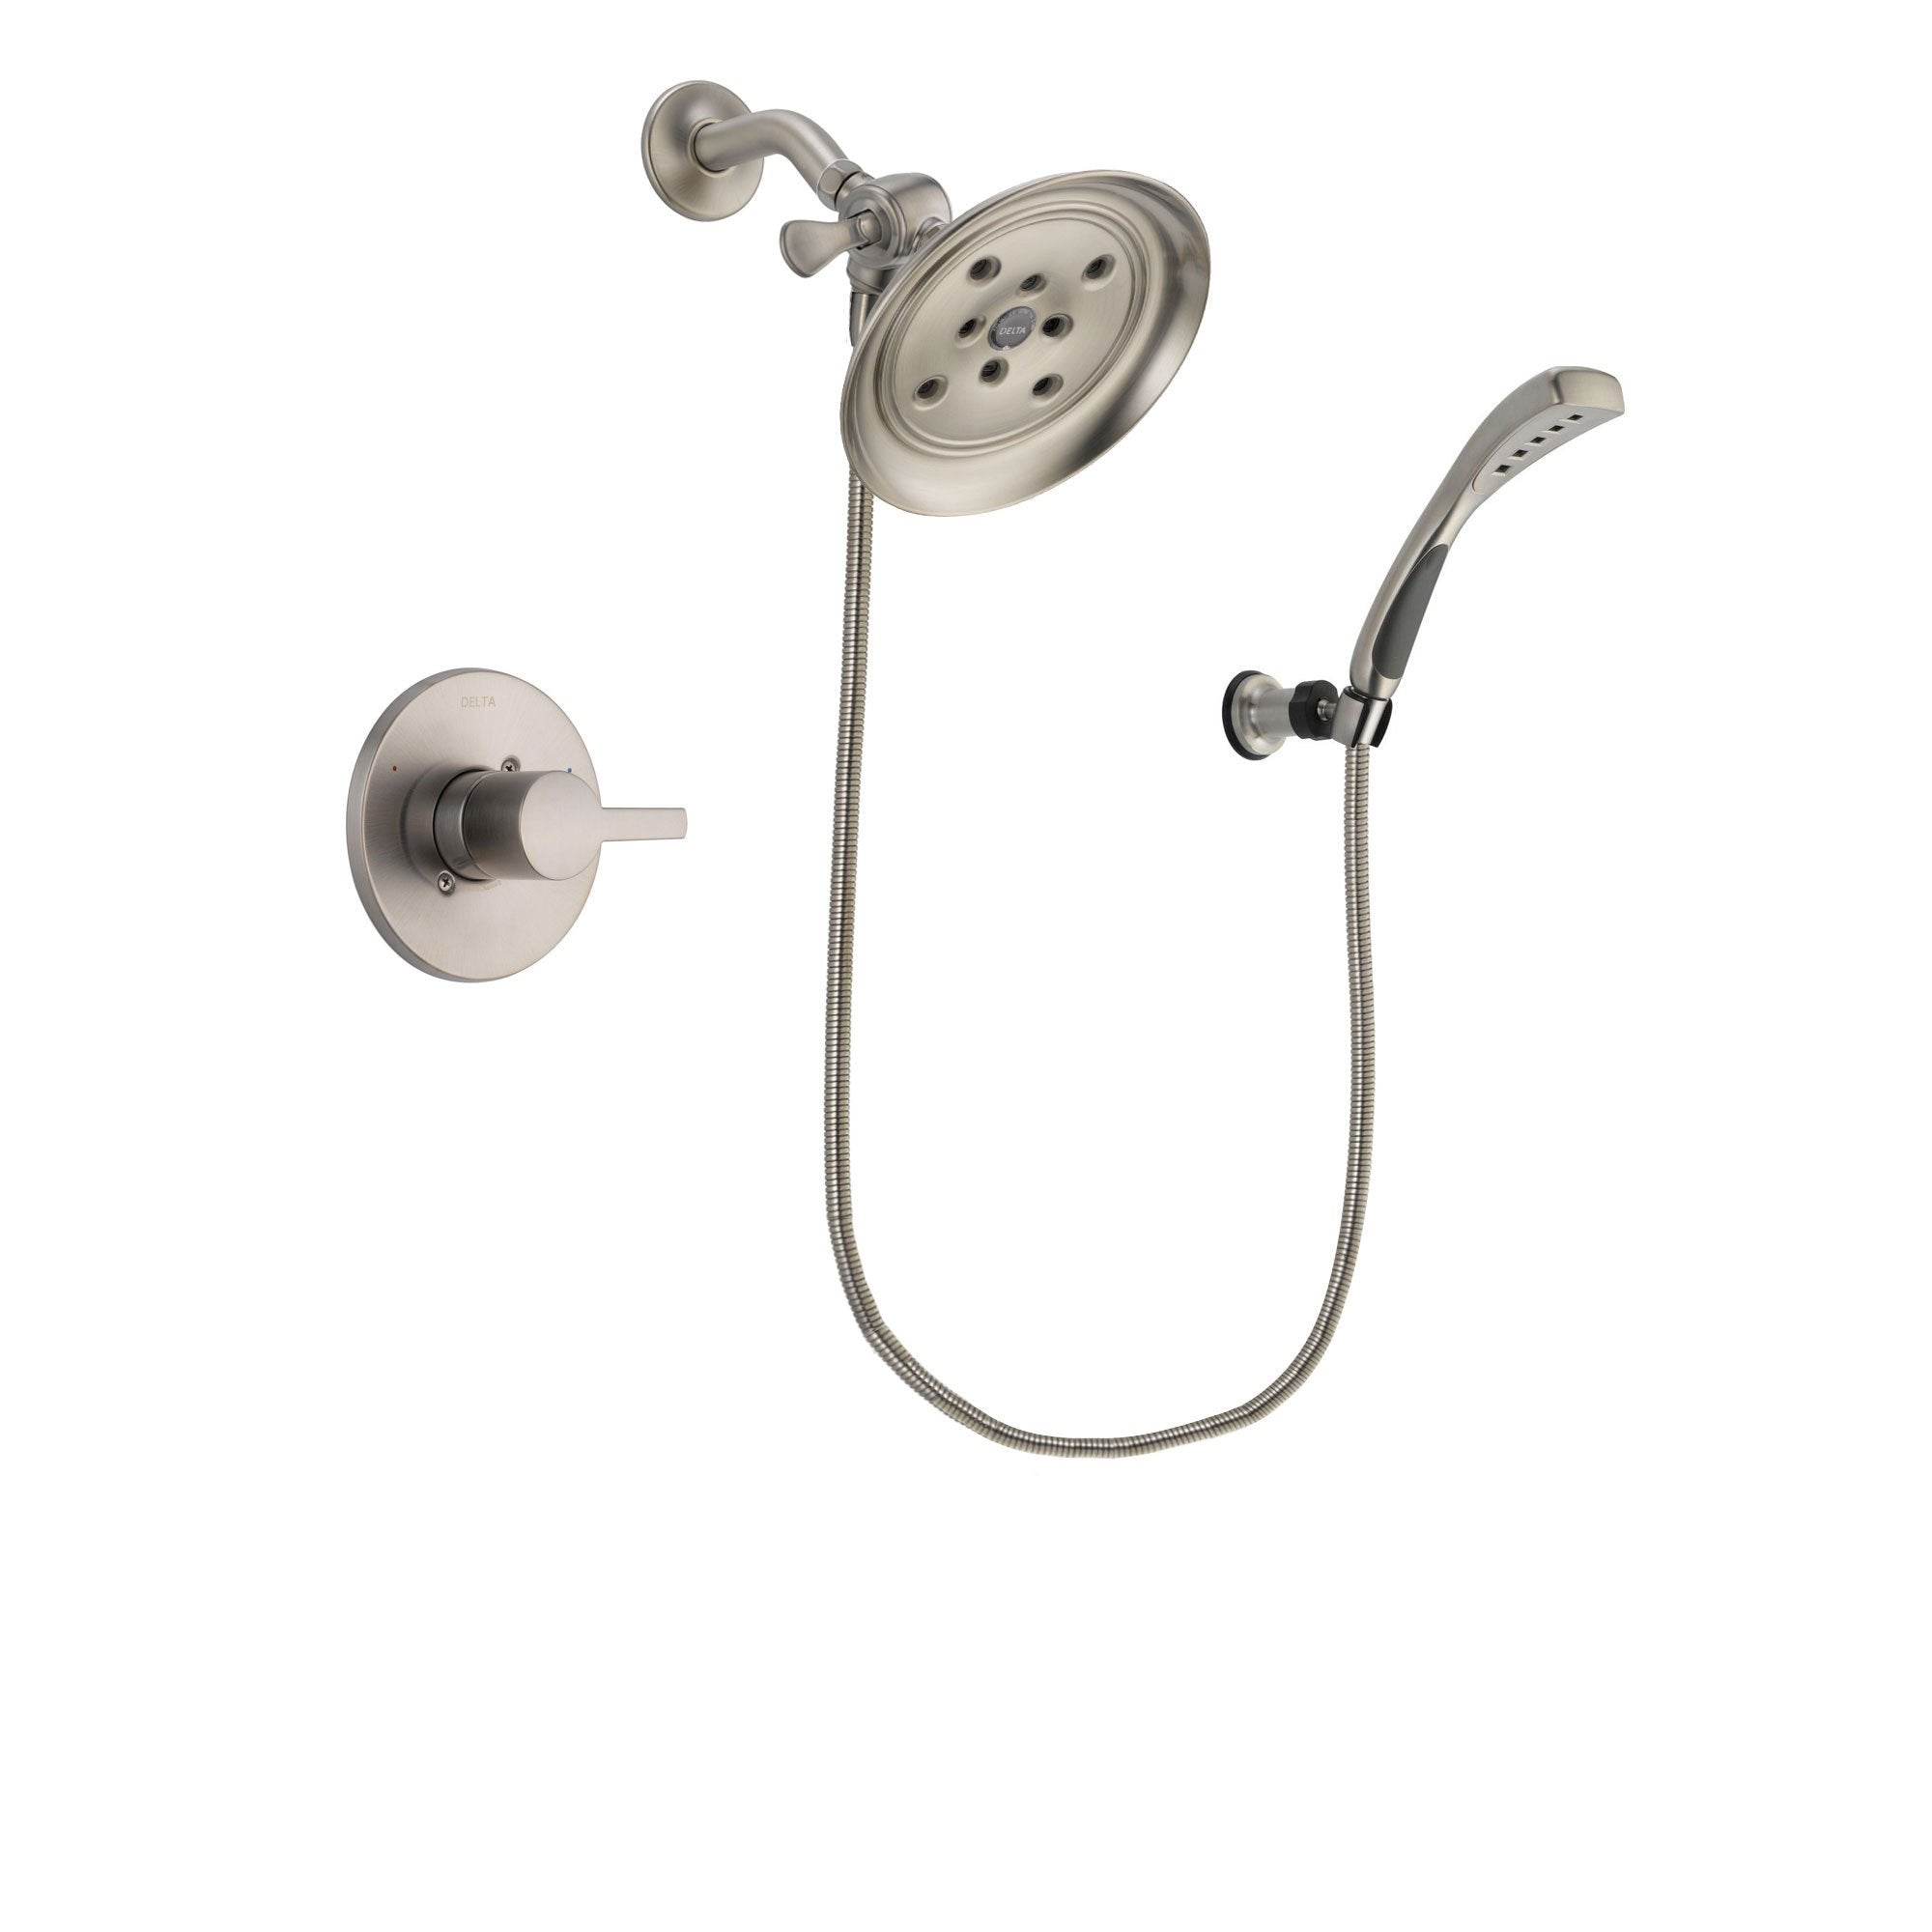 Delta Compel Stainless Steel Finish Shower Faucet System Package with Large Rain Showerhead and Wall Mounted Handshower Includes Rough-in Valve DSP1868V